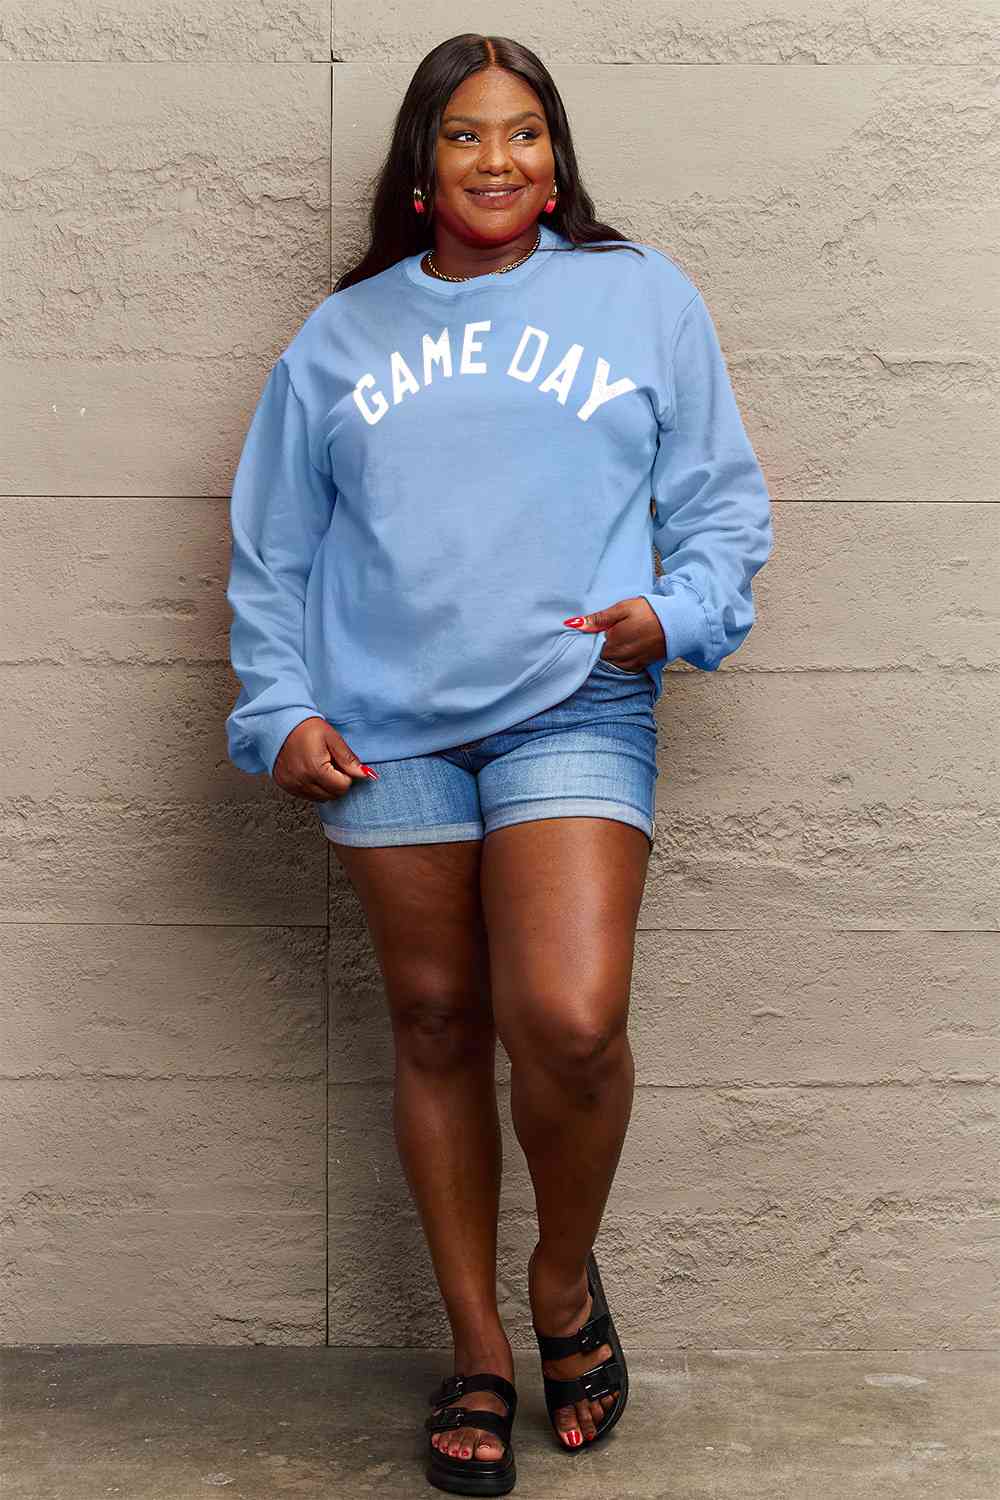 Simply Love Full Size GAME DAY Graphic Sweatshirt BLUE ZONE PLANET